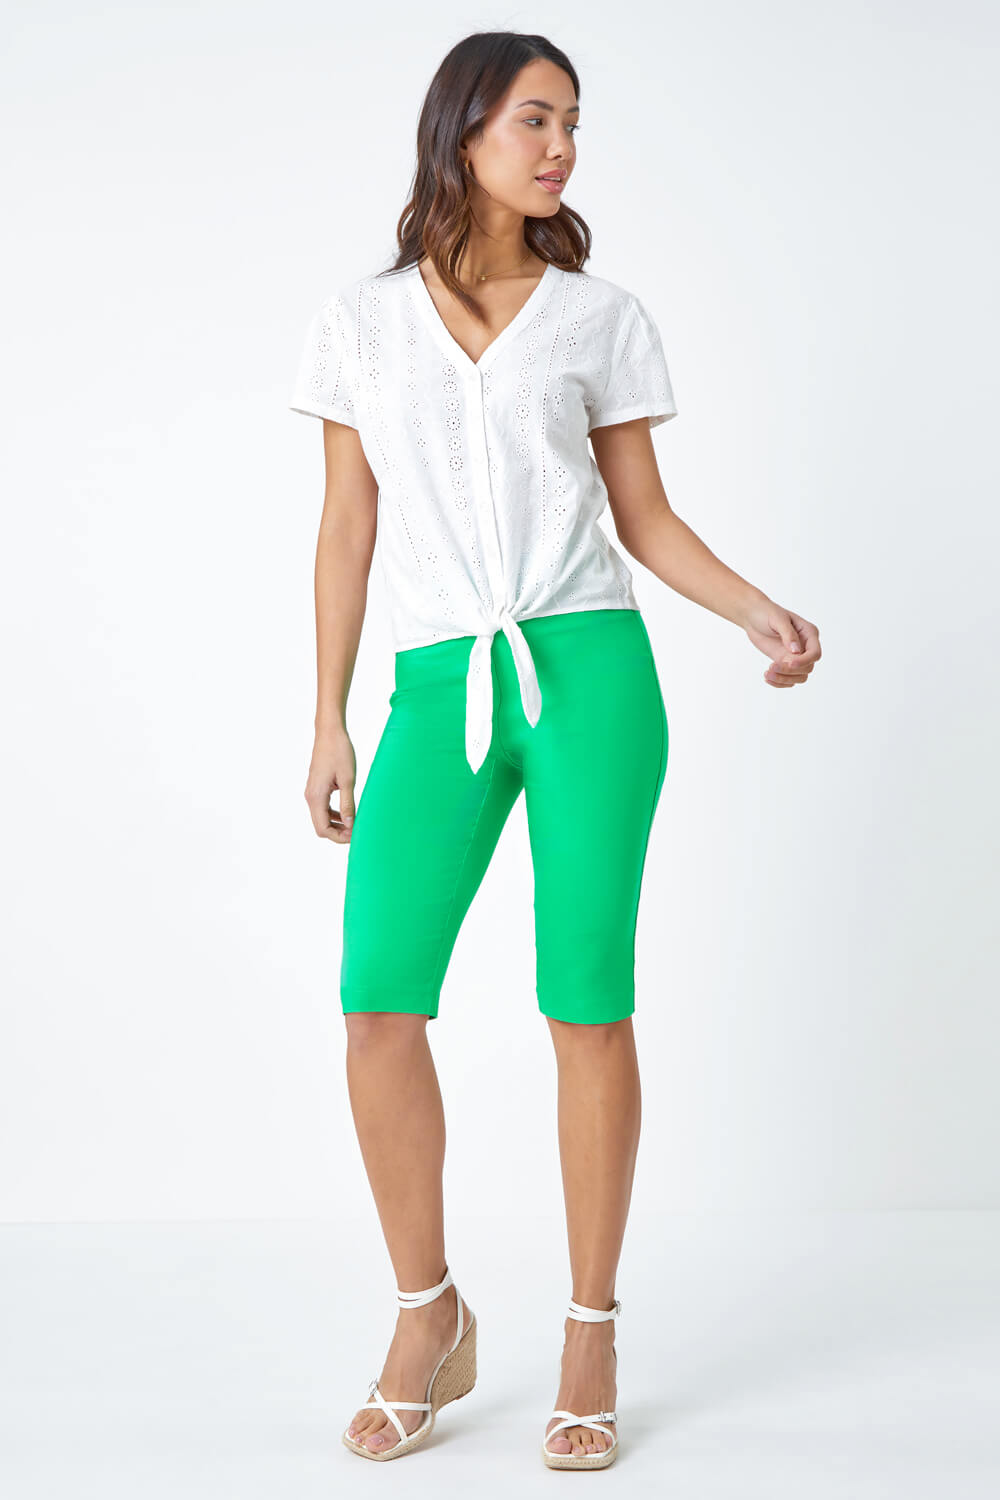 Pale Green Knee Length Stretch Shorts, Image 2 of 5